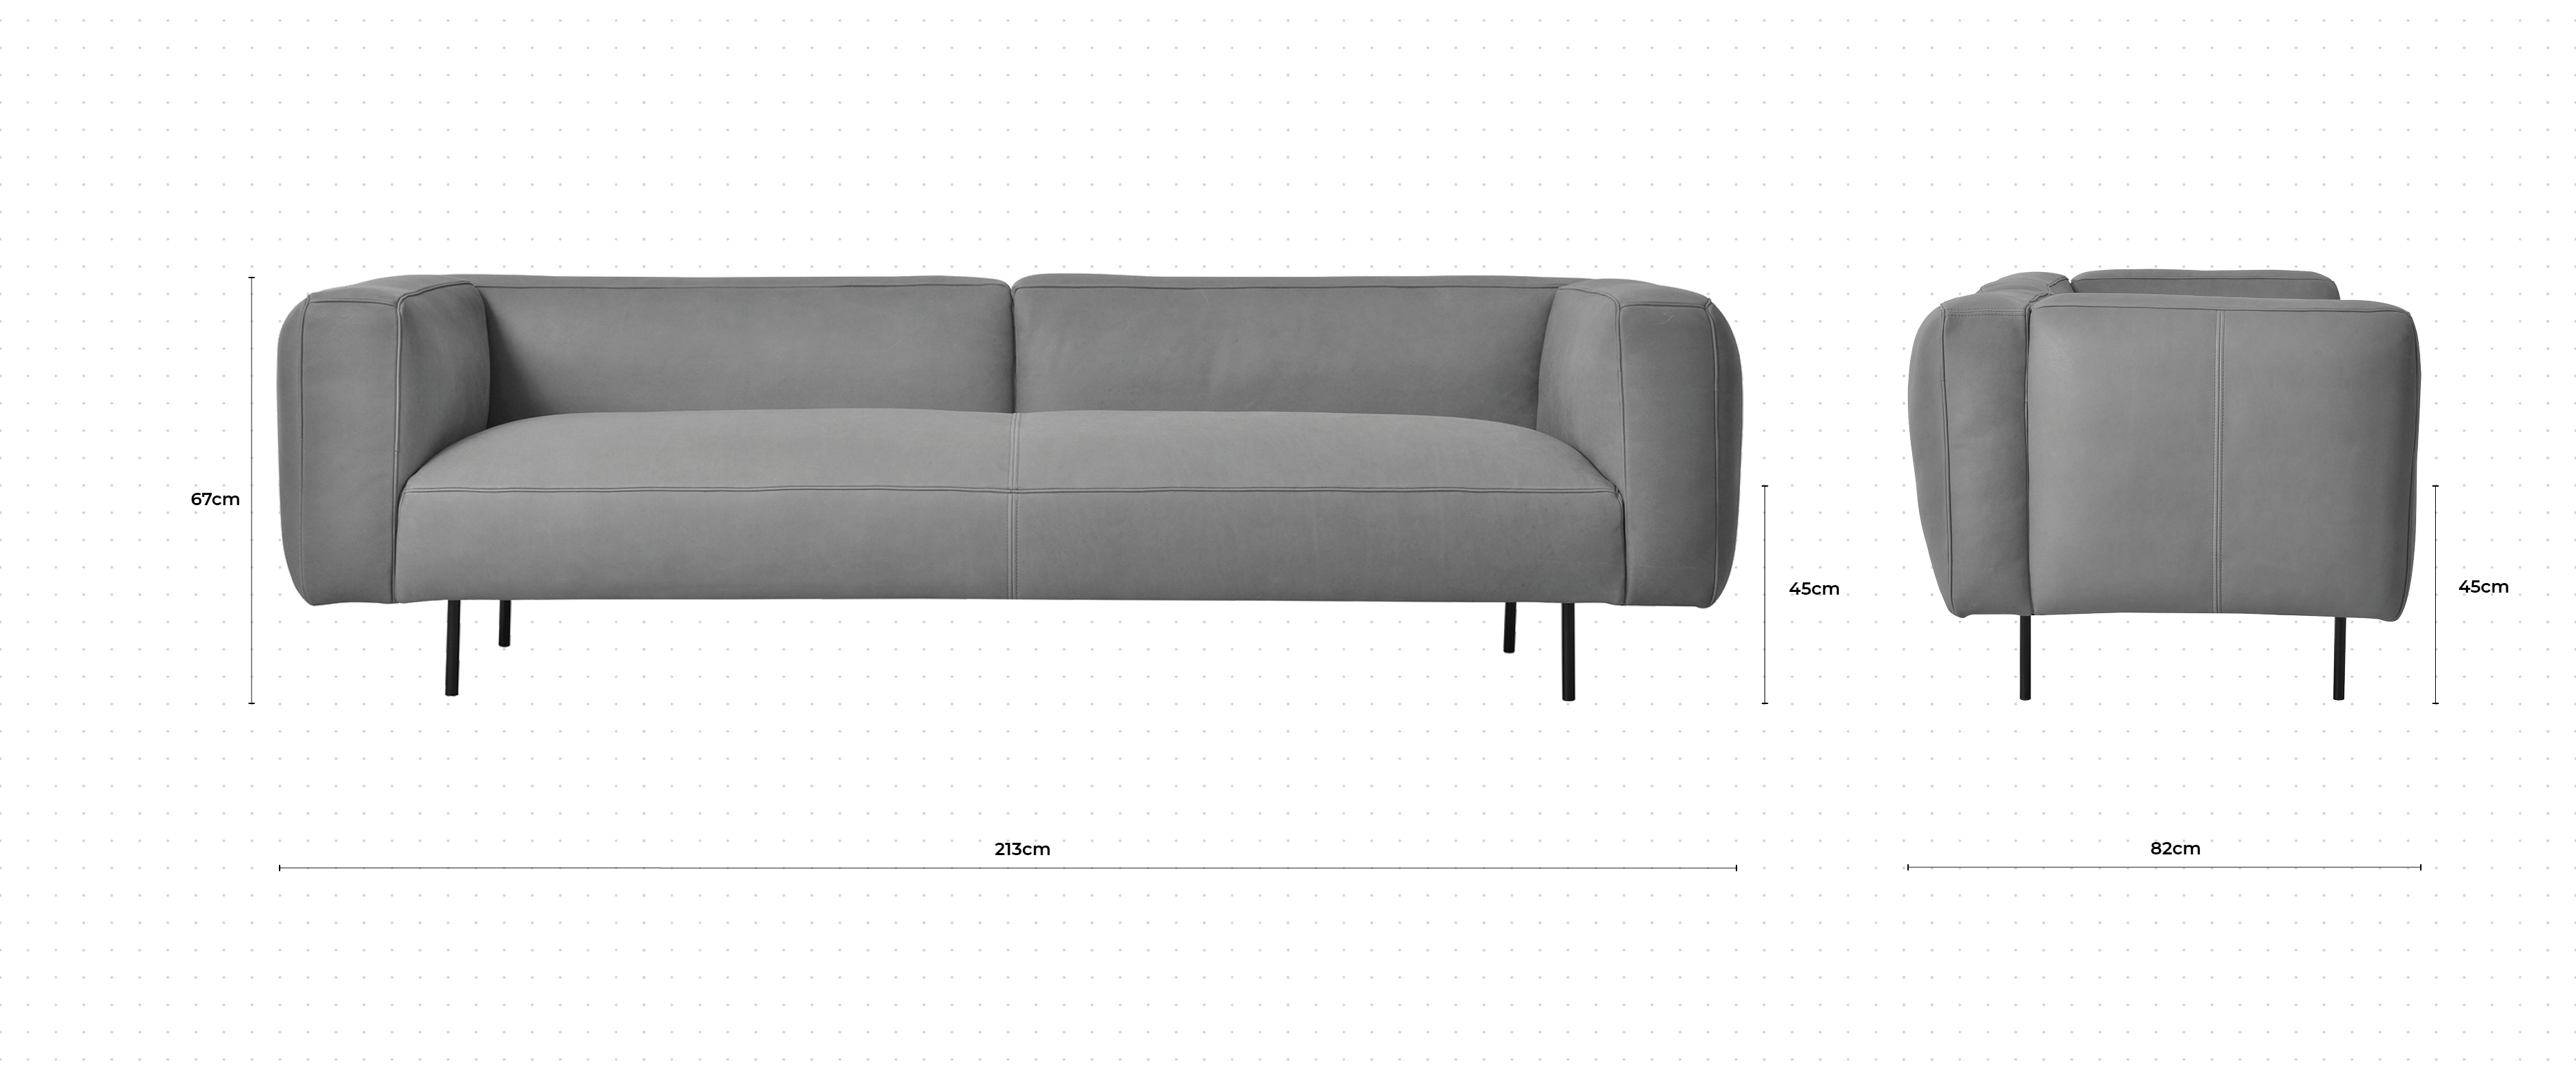 Glace 3 Seater Sofa dimensions